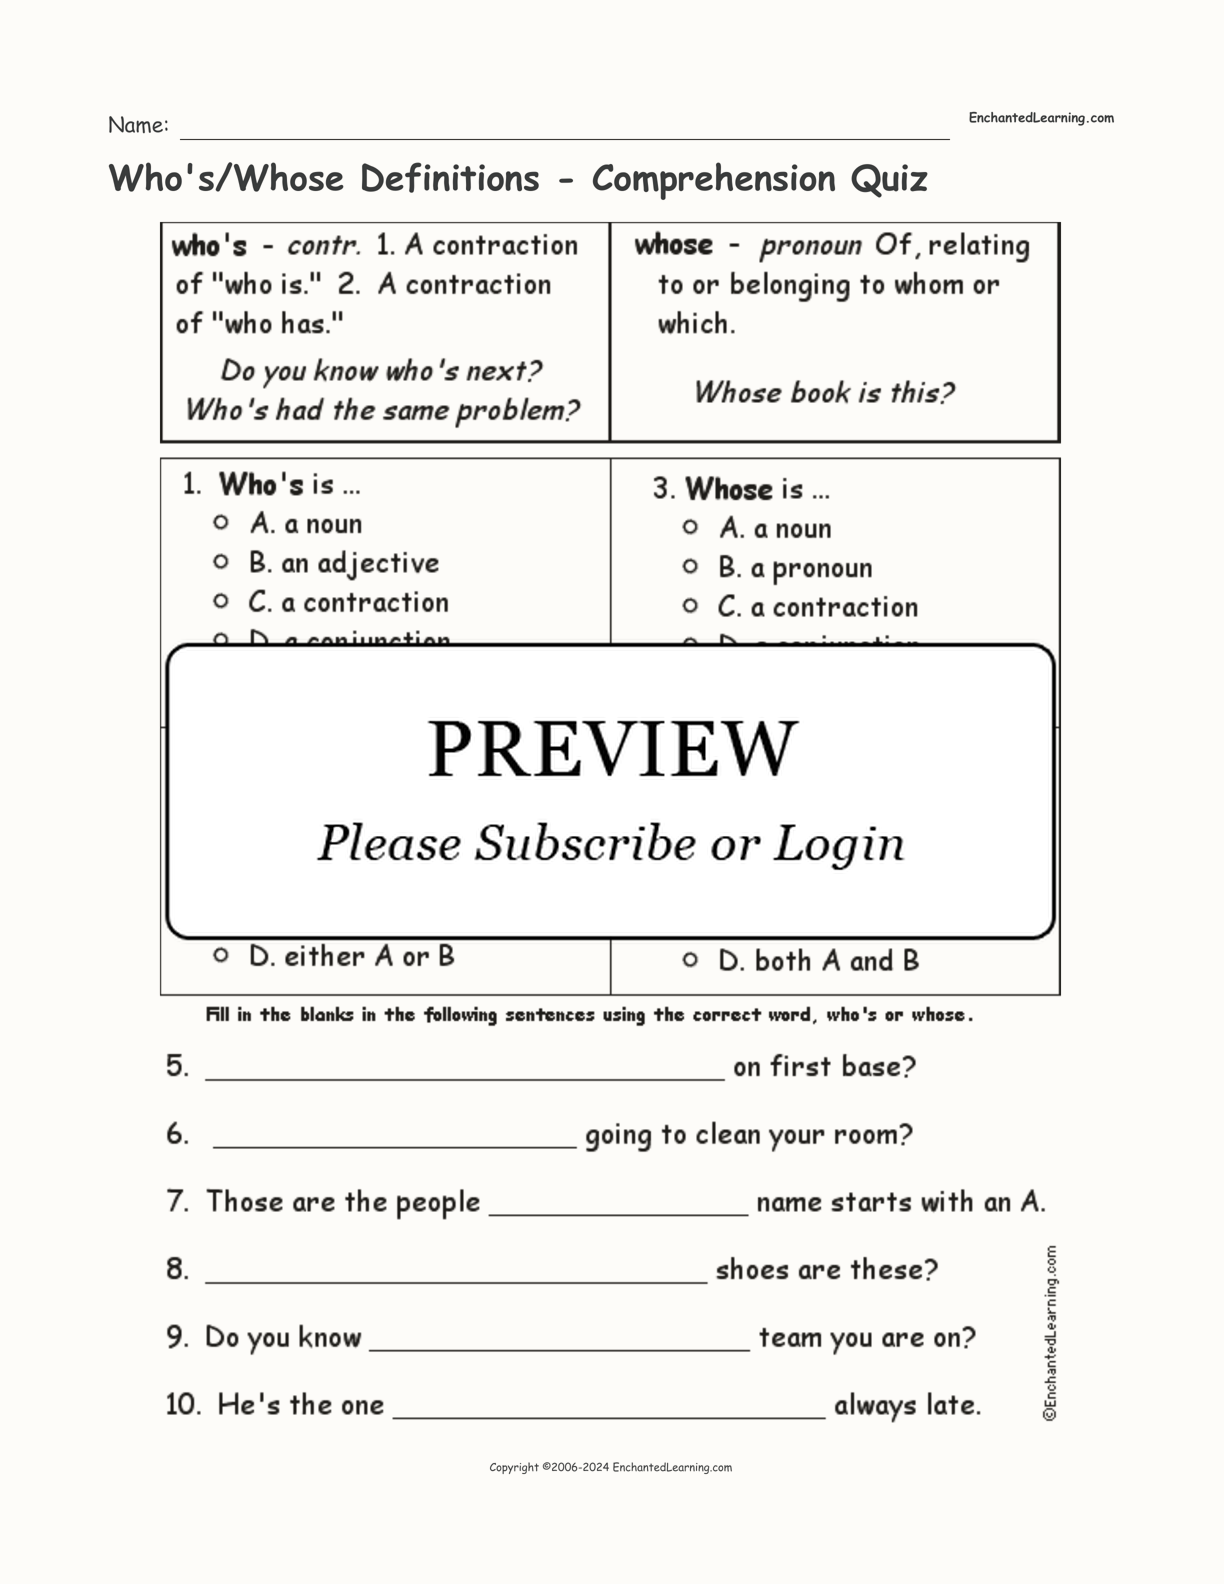 Who's/Whose Definitions - Comprehension Quiz interactive worksheet page 1